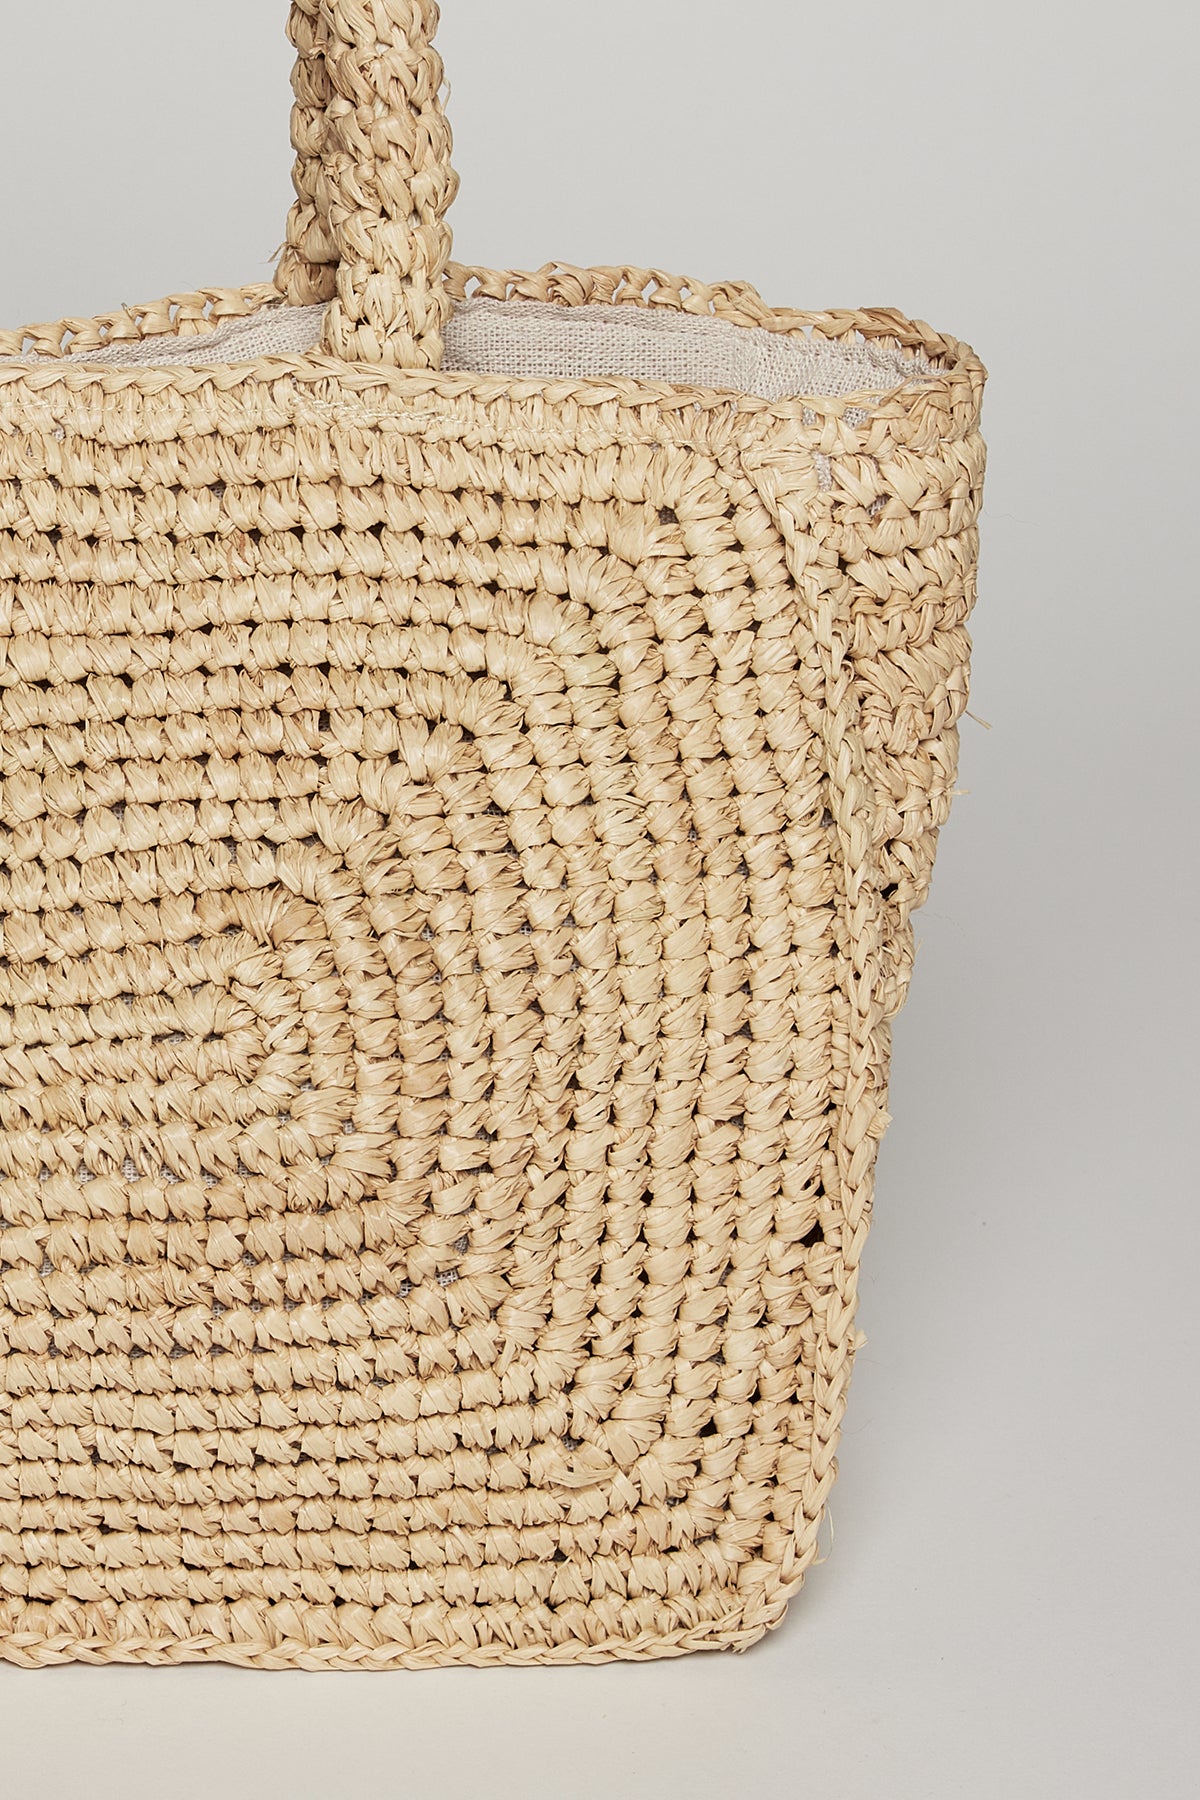 Close-up of a durable TINA STRAW TOTE BAG with sturdy twisted handles, featuring a detailed spiral pattern and texture by Velvet by Graham & Spencer.-36571459092673